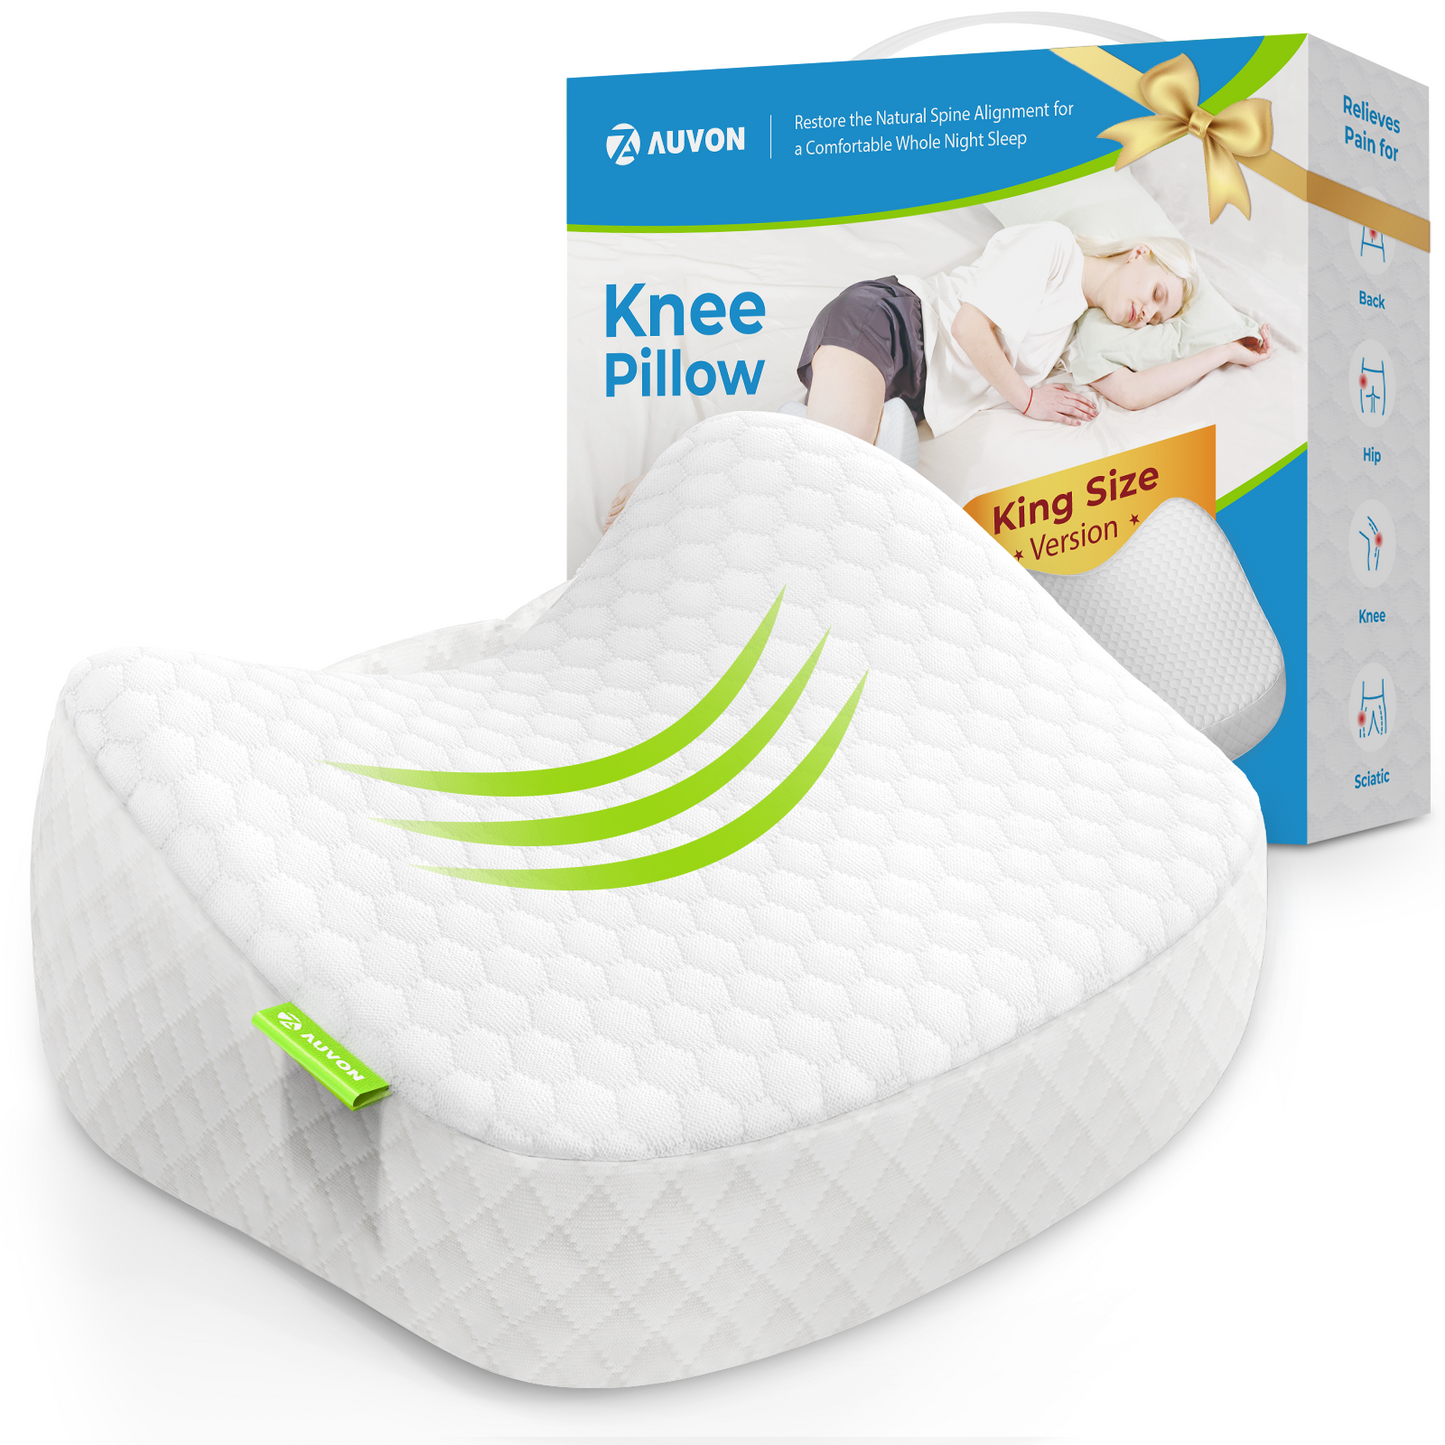 AUVON King Size Knee Pillow for Side Sleepers with Ice Silky Fabric, Enhanced Support Memory Foam Leg Pillow for Sleeping, Large Hip Pillow for Soothing Back, HIPS, Knee Joints, Sciatica Pain Relief